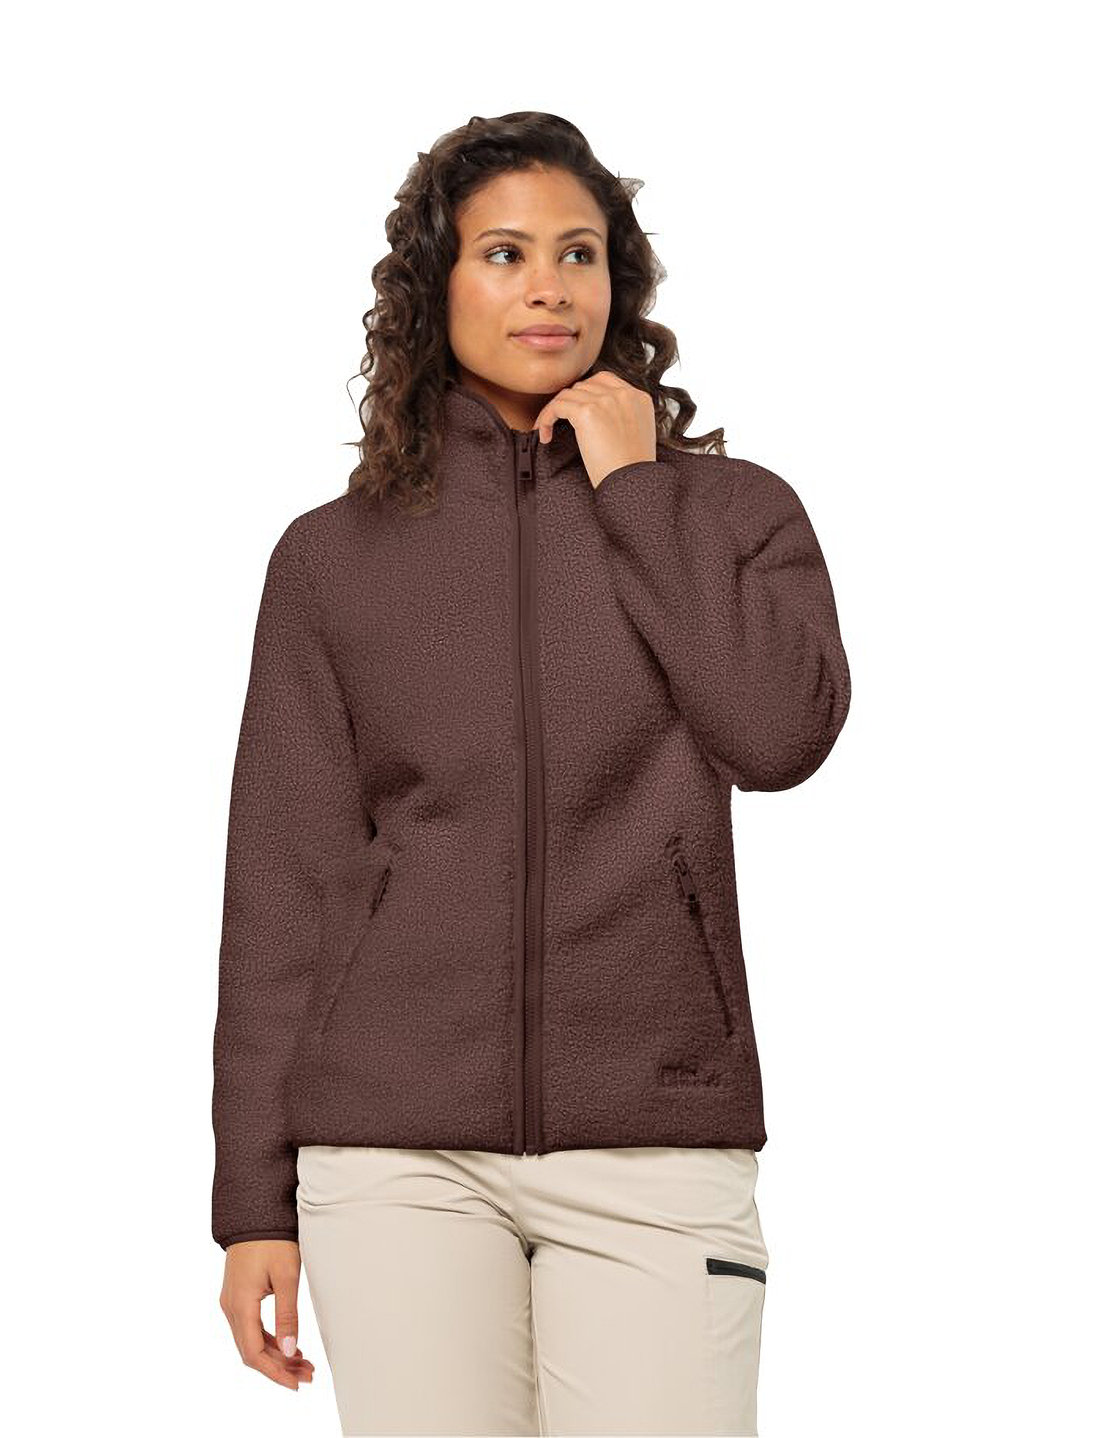 Fleece jackets and sweaters for women